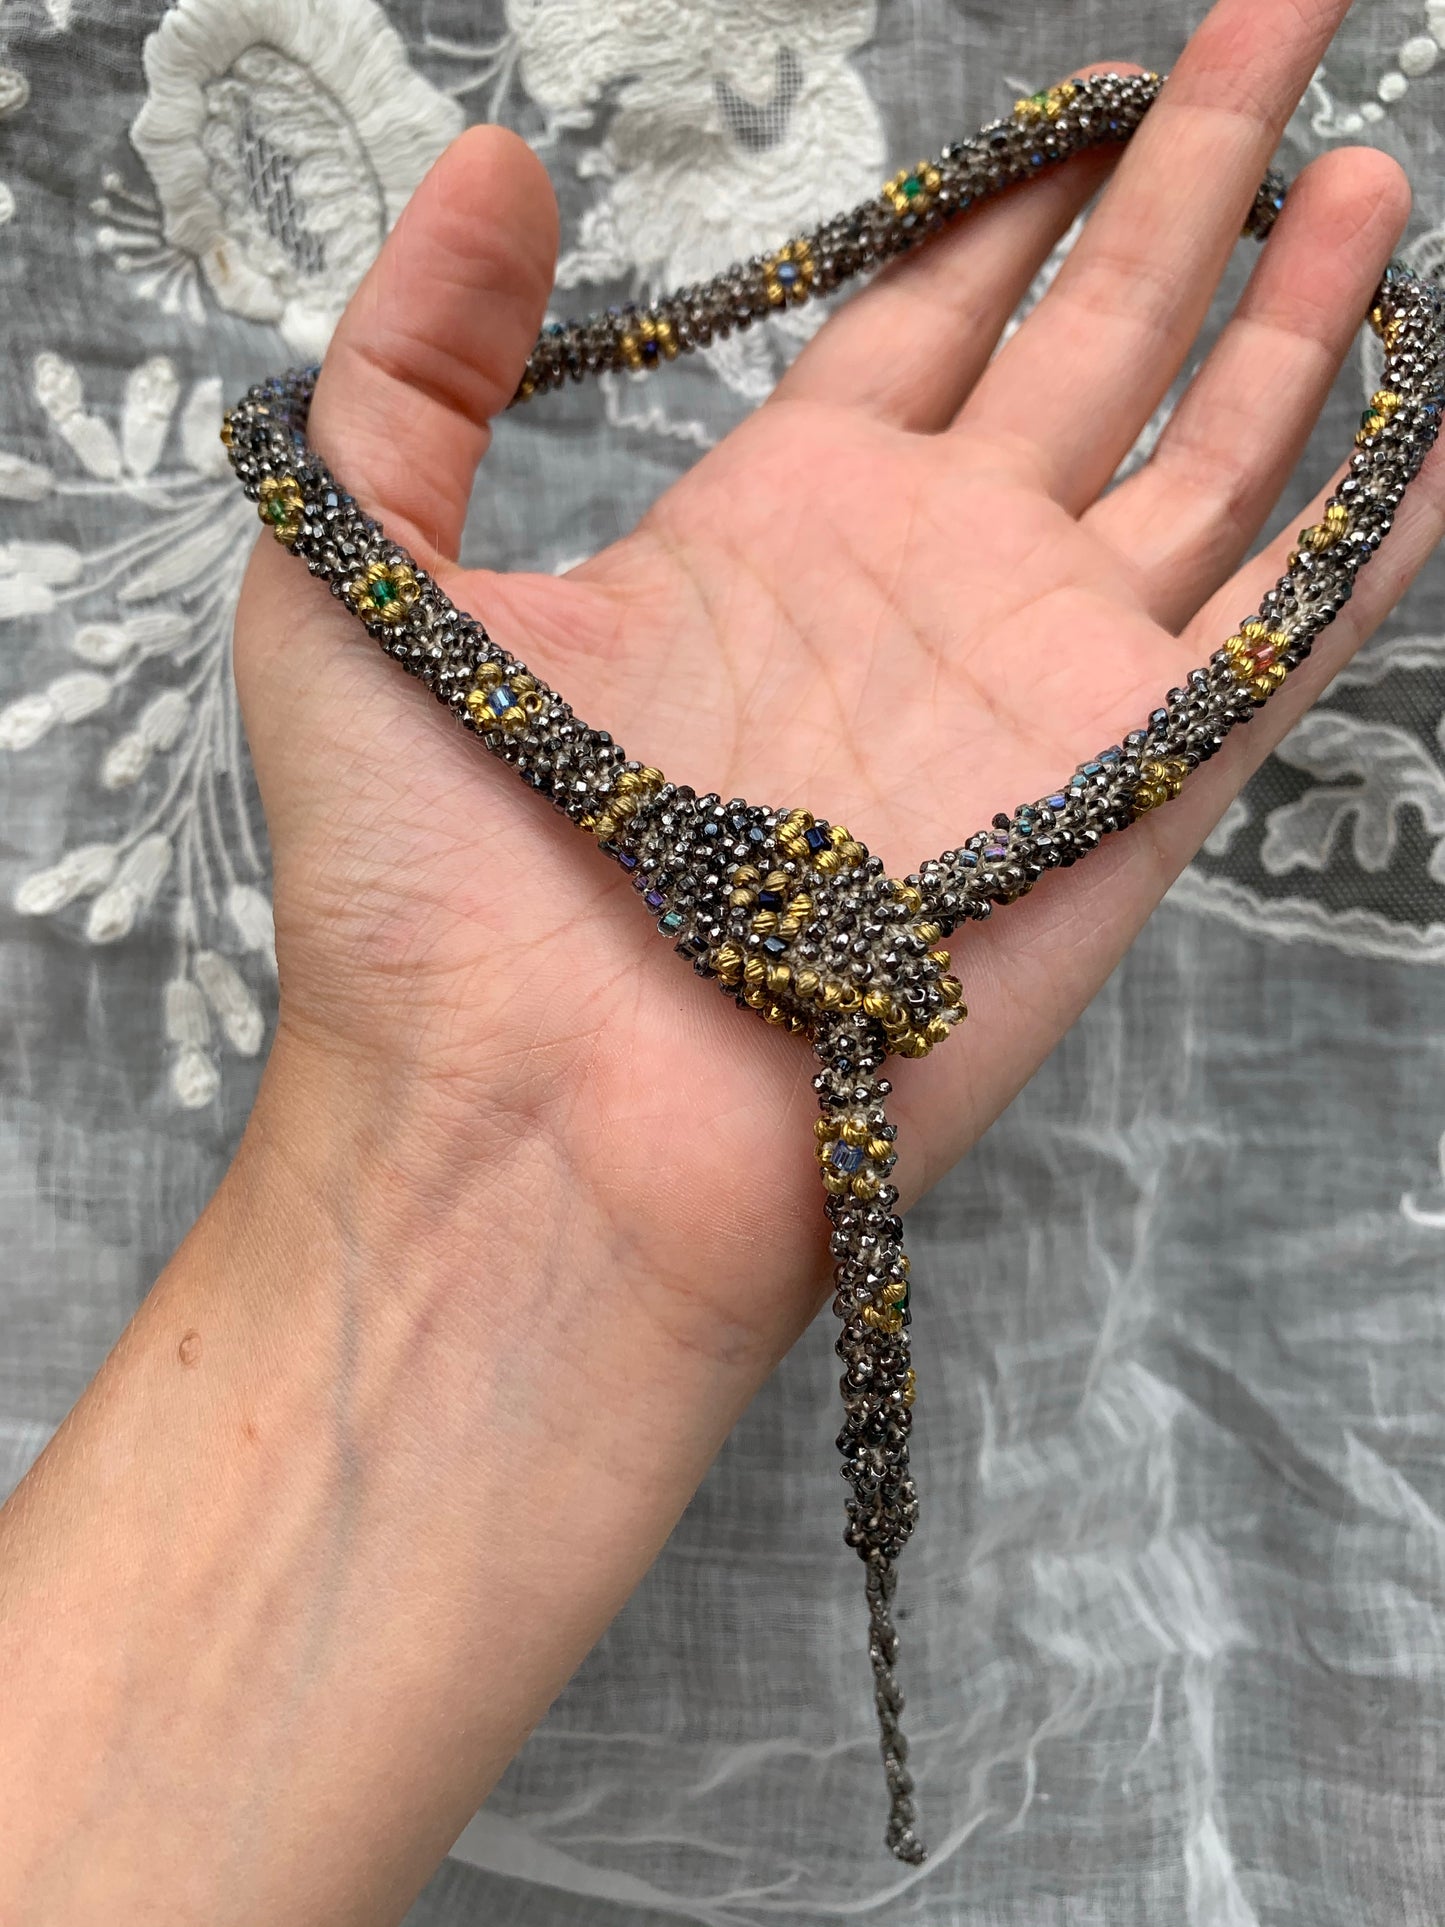 Bead Crochet Snake Necklace | Antique steel cut, Torse and glass beads